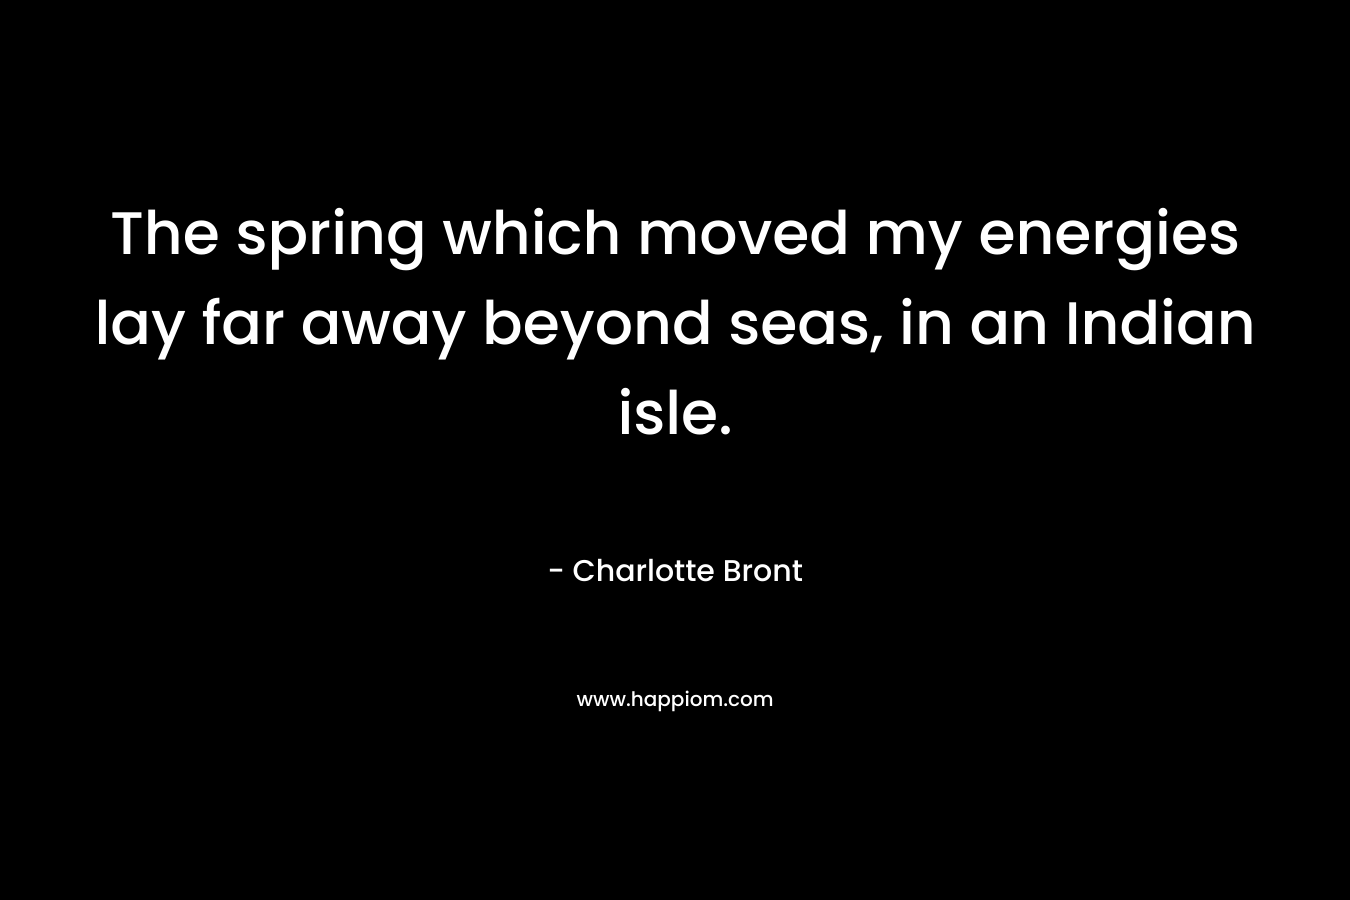 The spring which moved my energies lay far away beyond seas, in an Indian isle. – Charlotte Bront